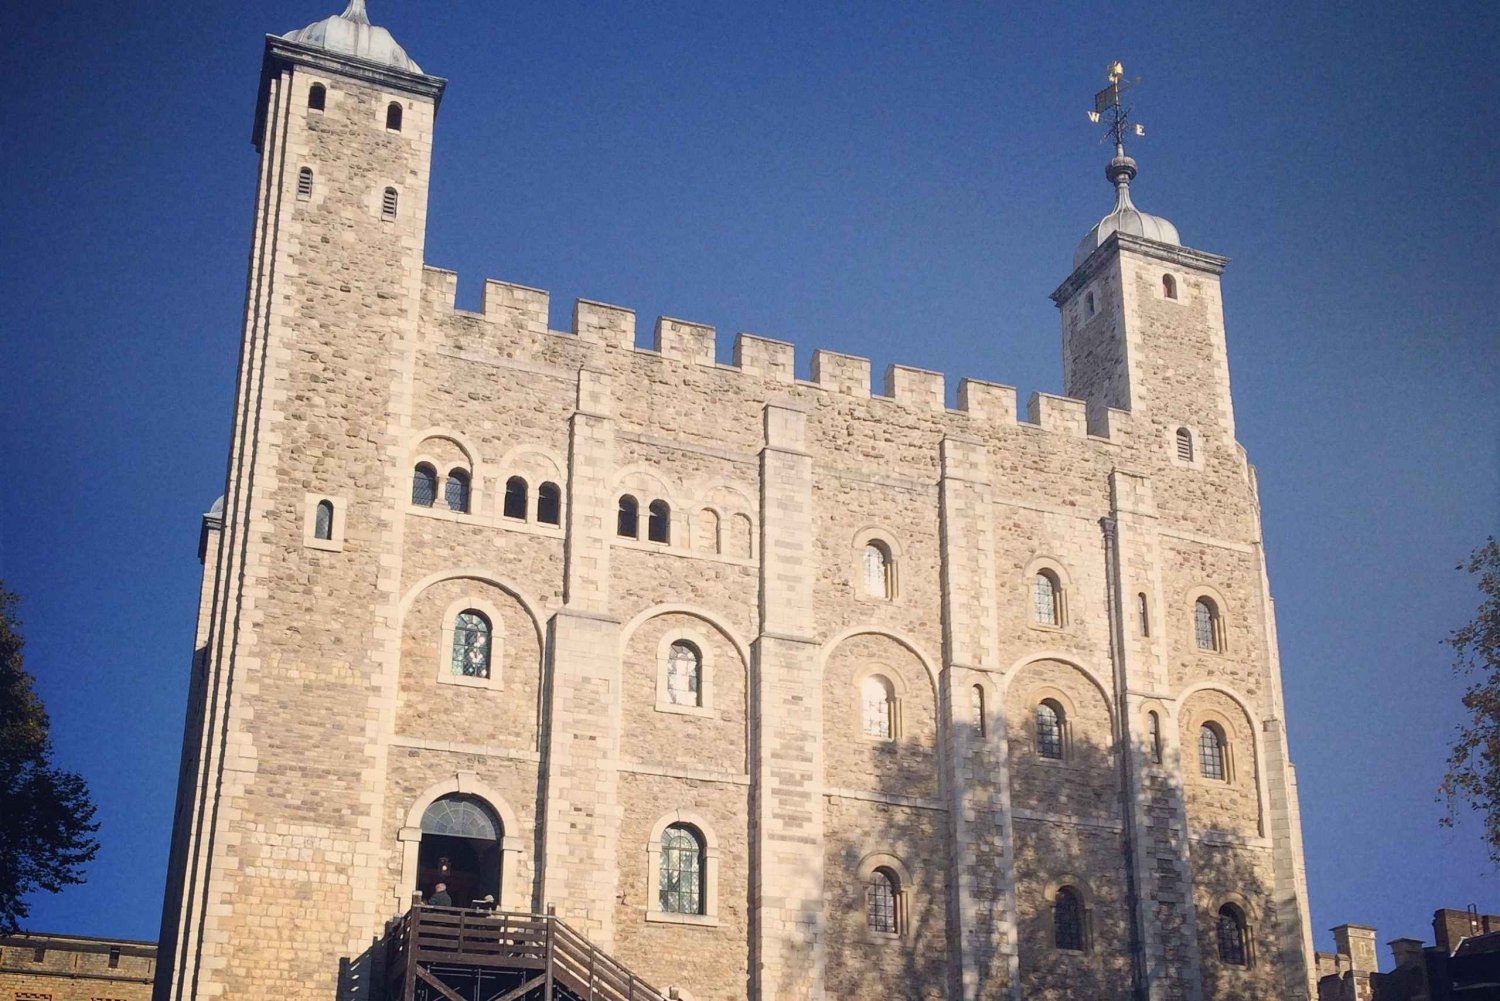 Tower of London Private Guided Tour